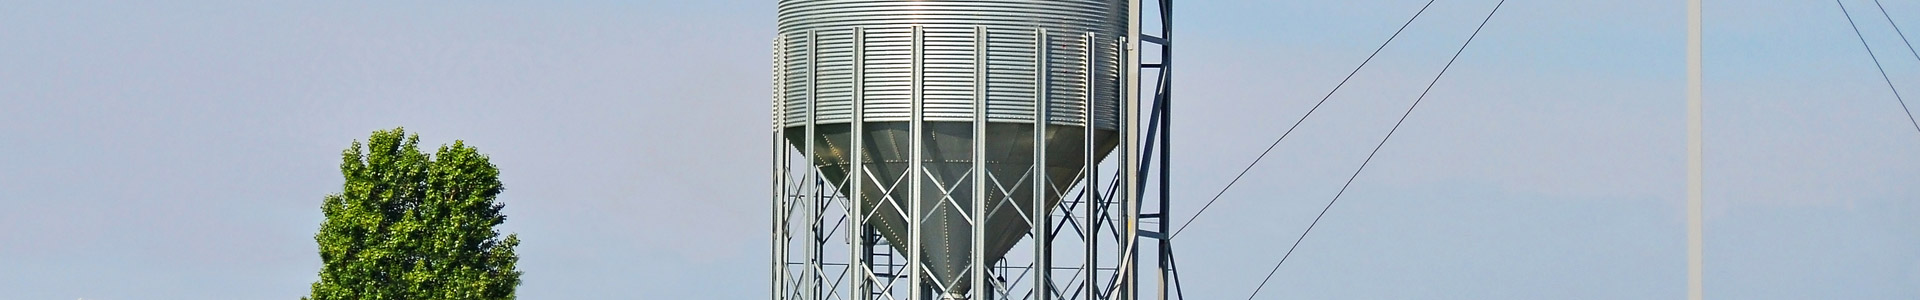 Grain Cleaners and Dryers